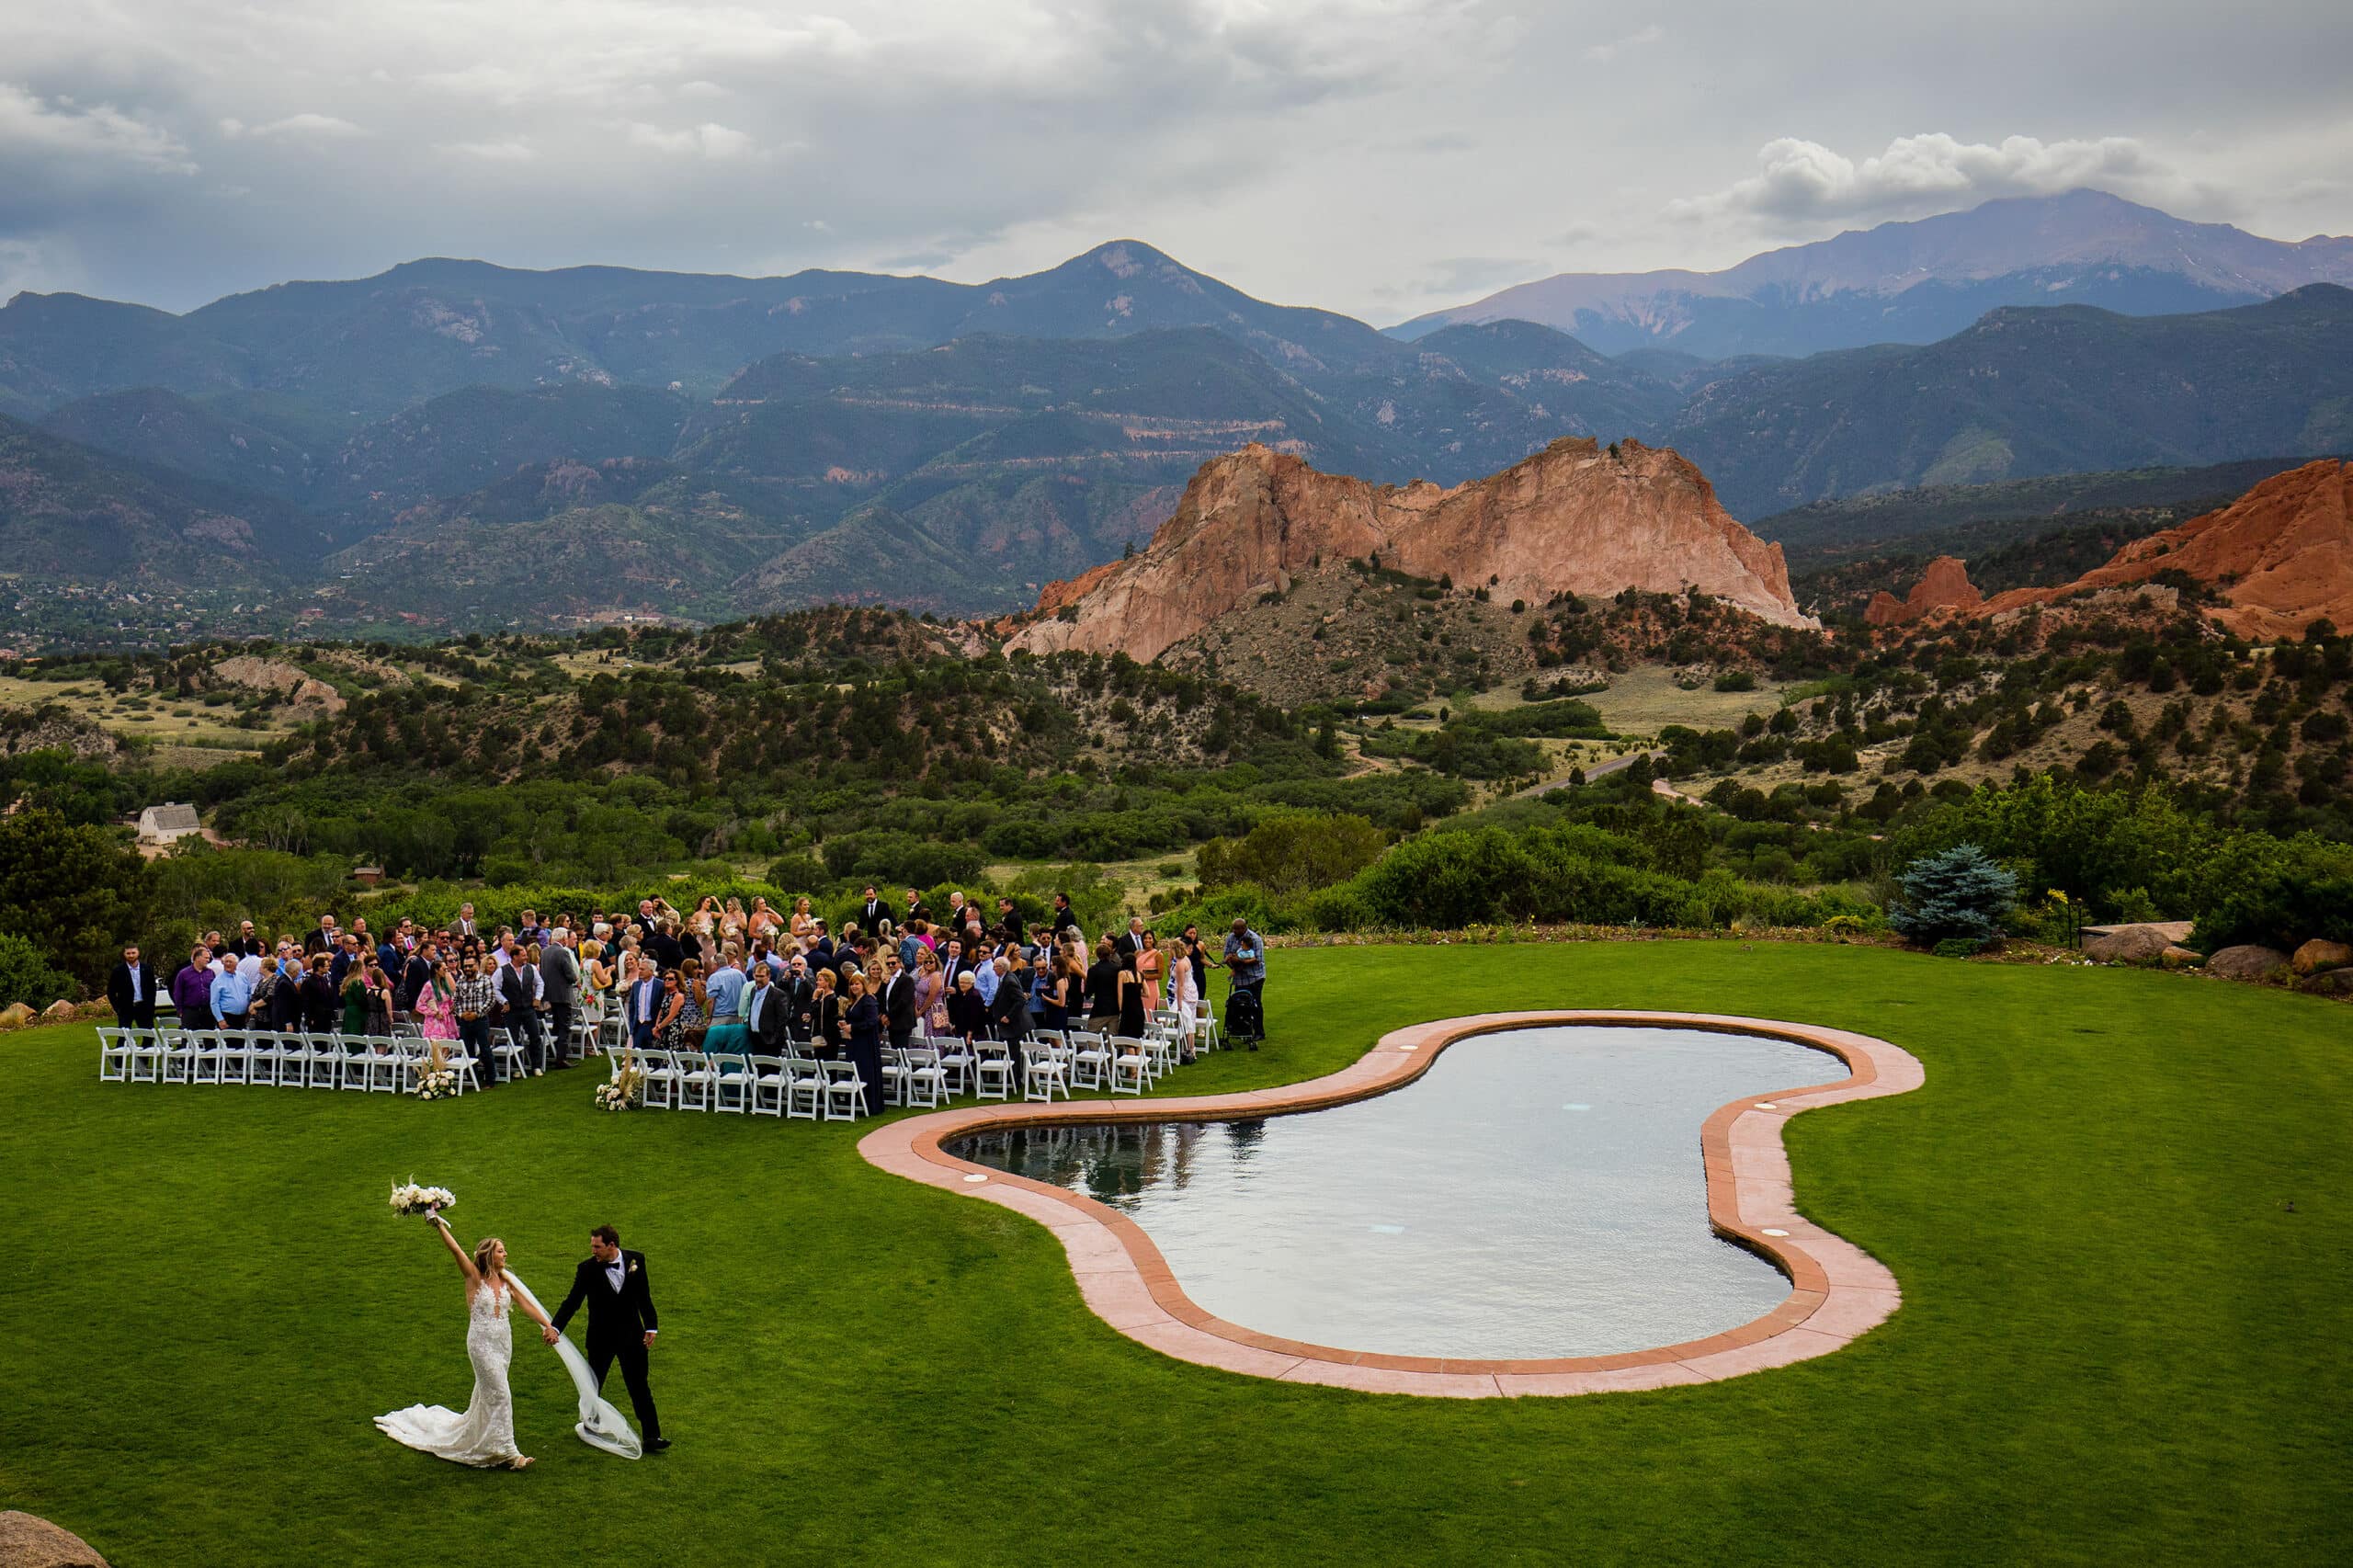 The bride and groom celebrate as they leave their wedding ceremony at Garden of the Gods Resort in Colorado Springs